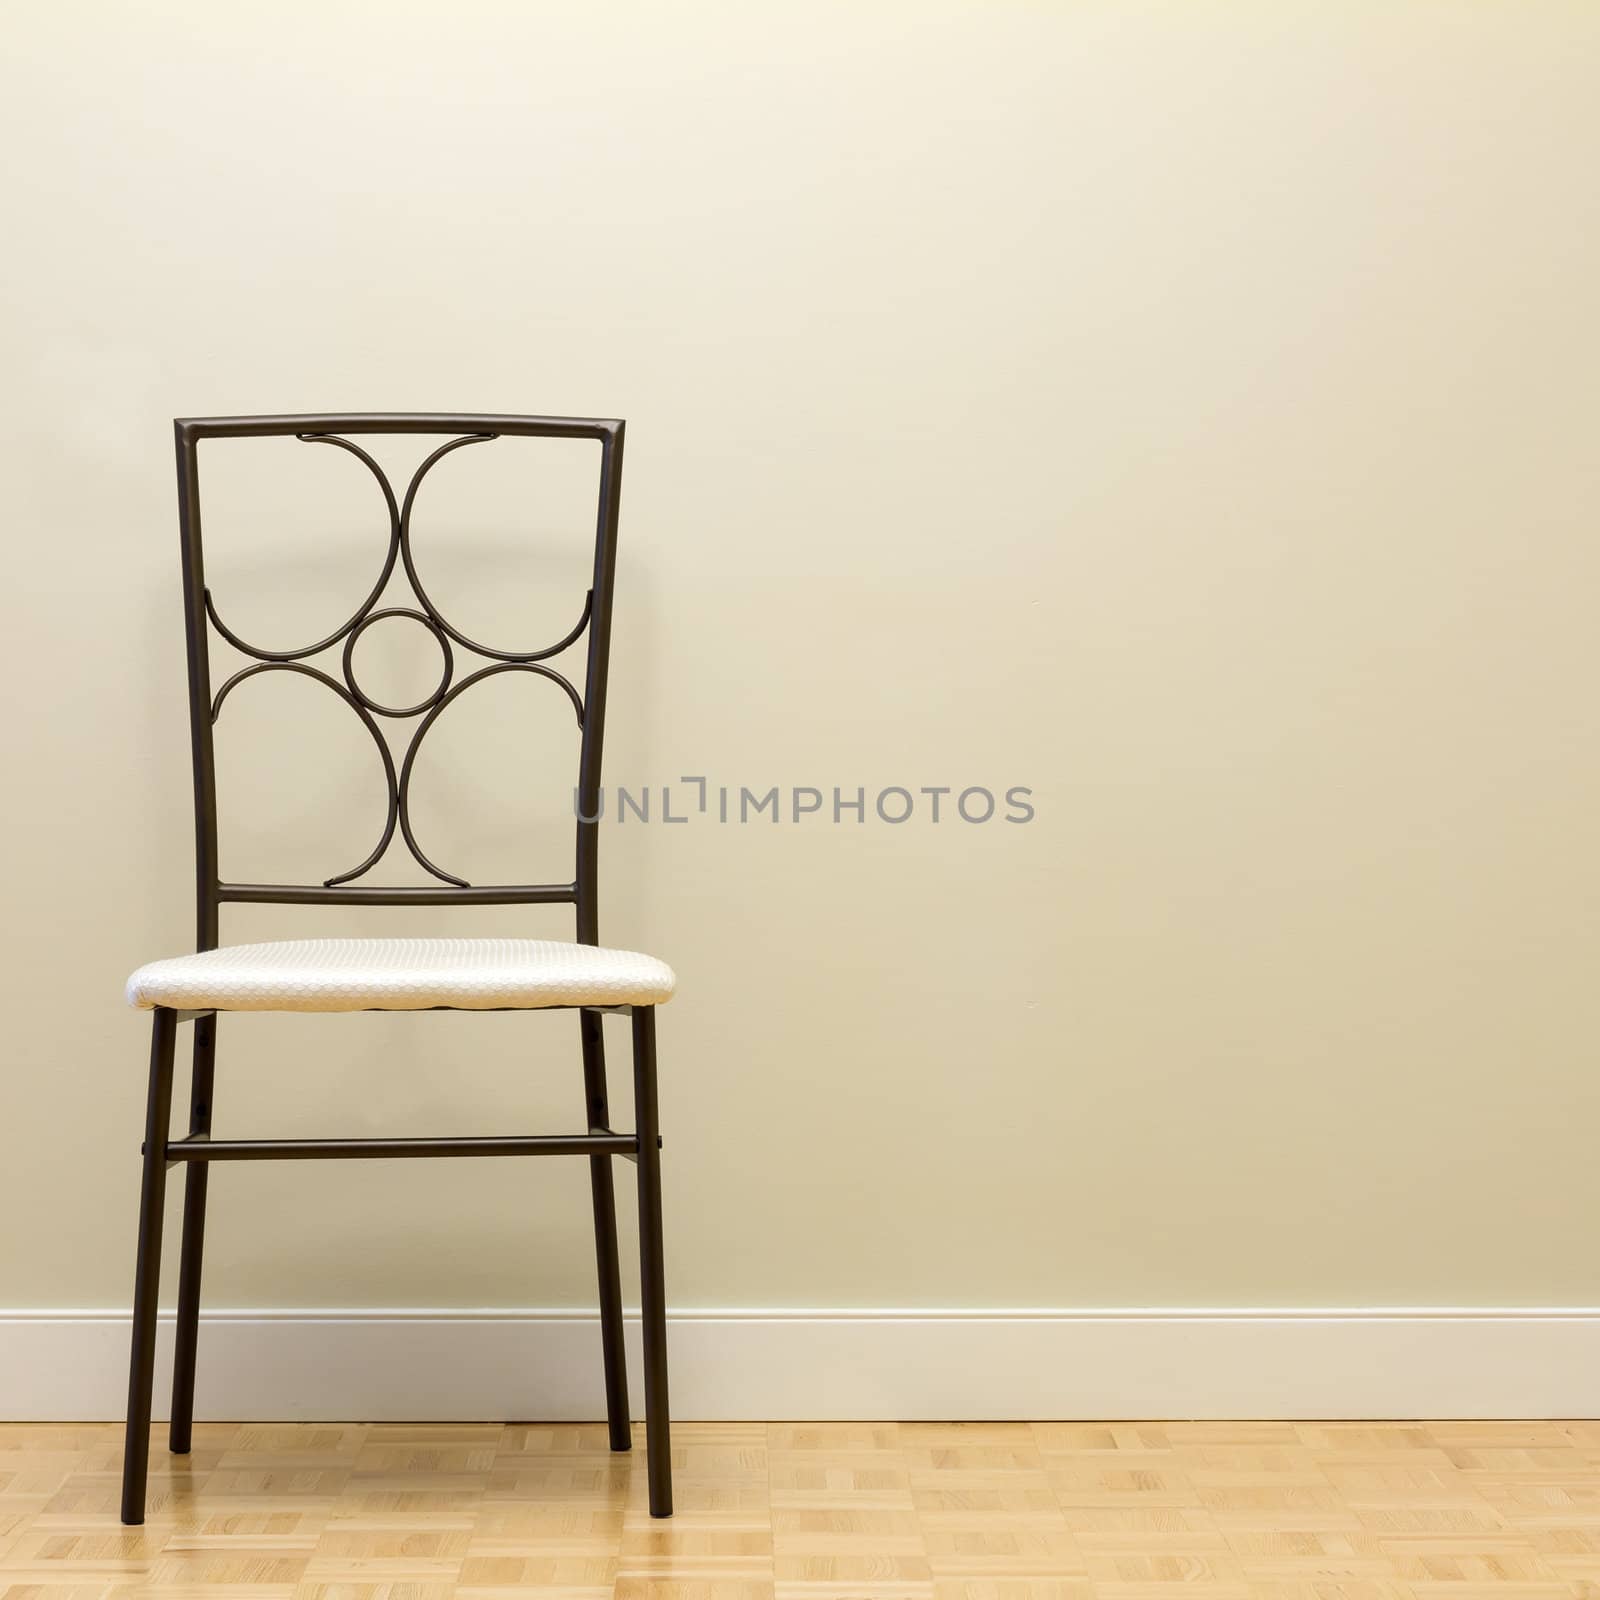 Chair against wall in a new apartment